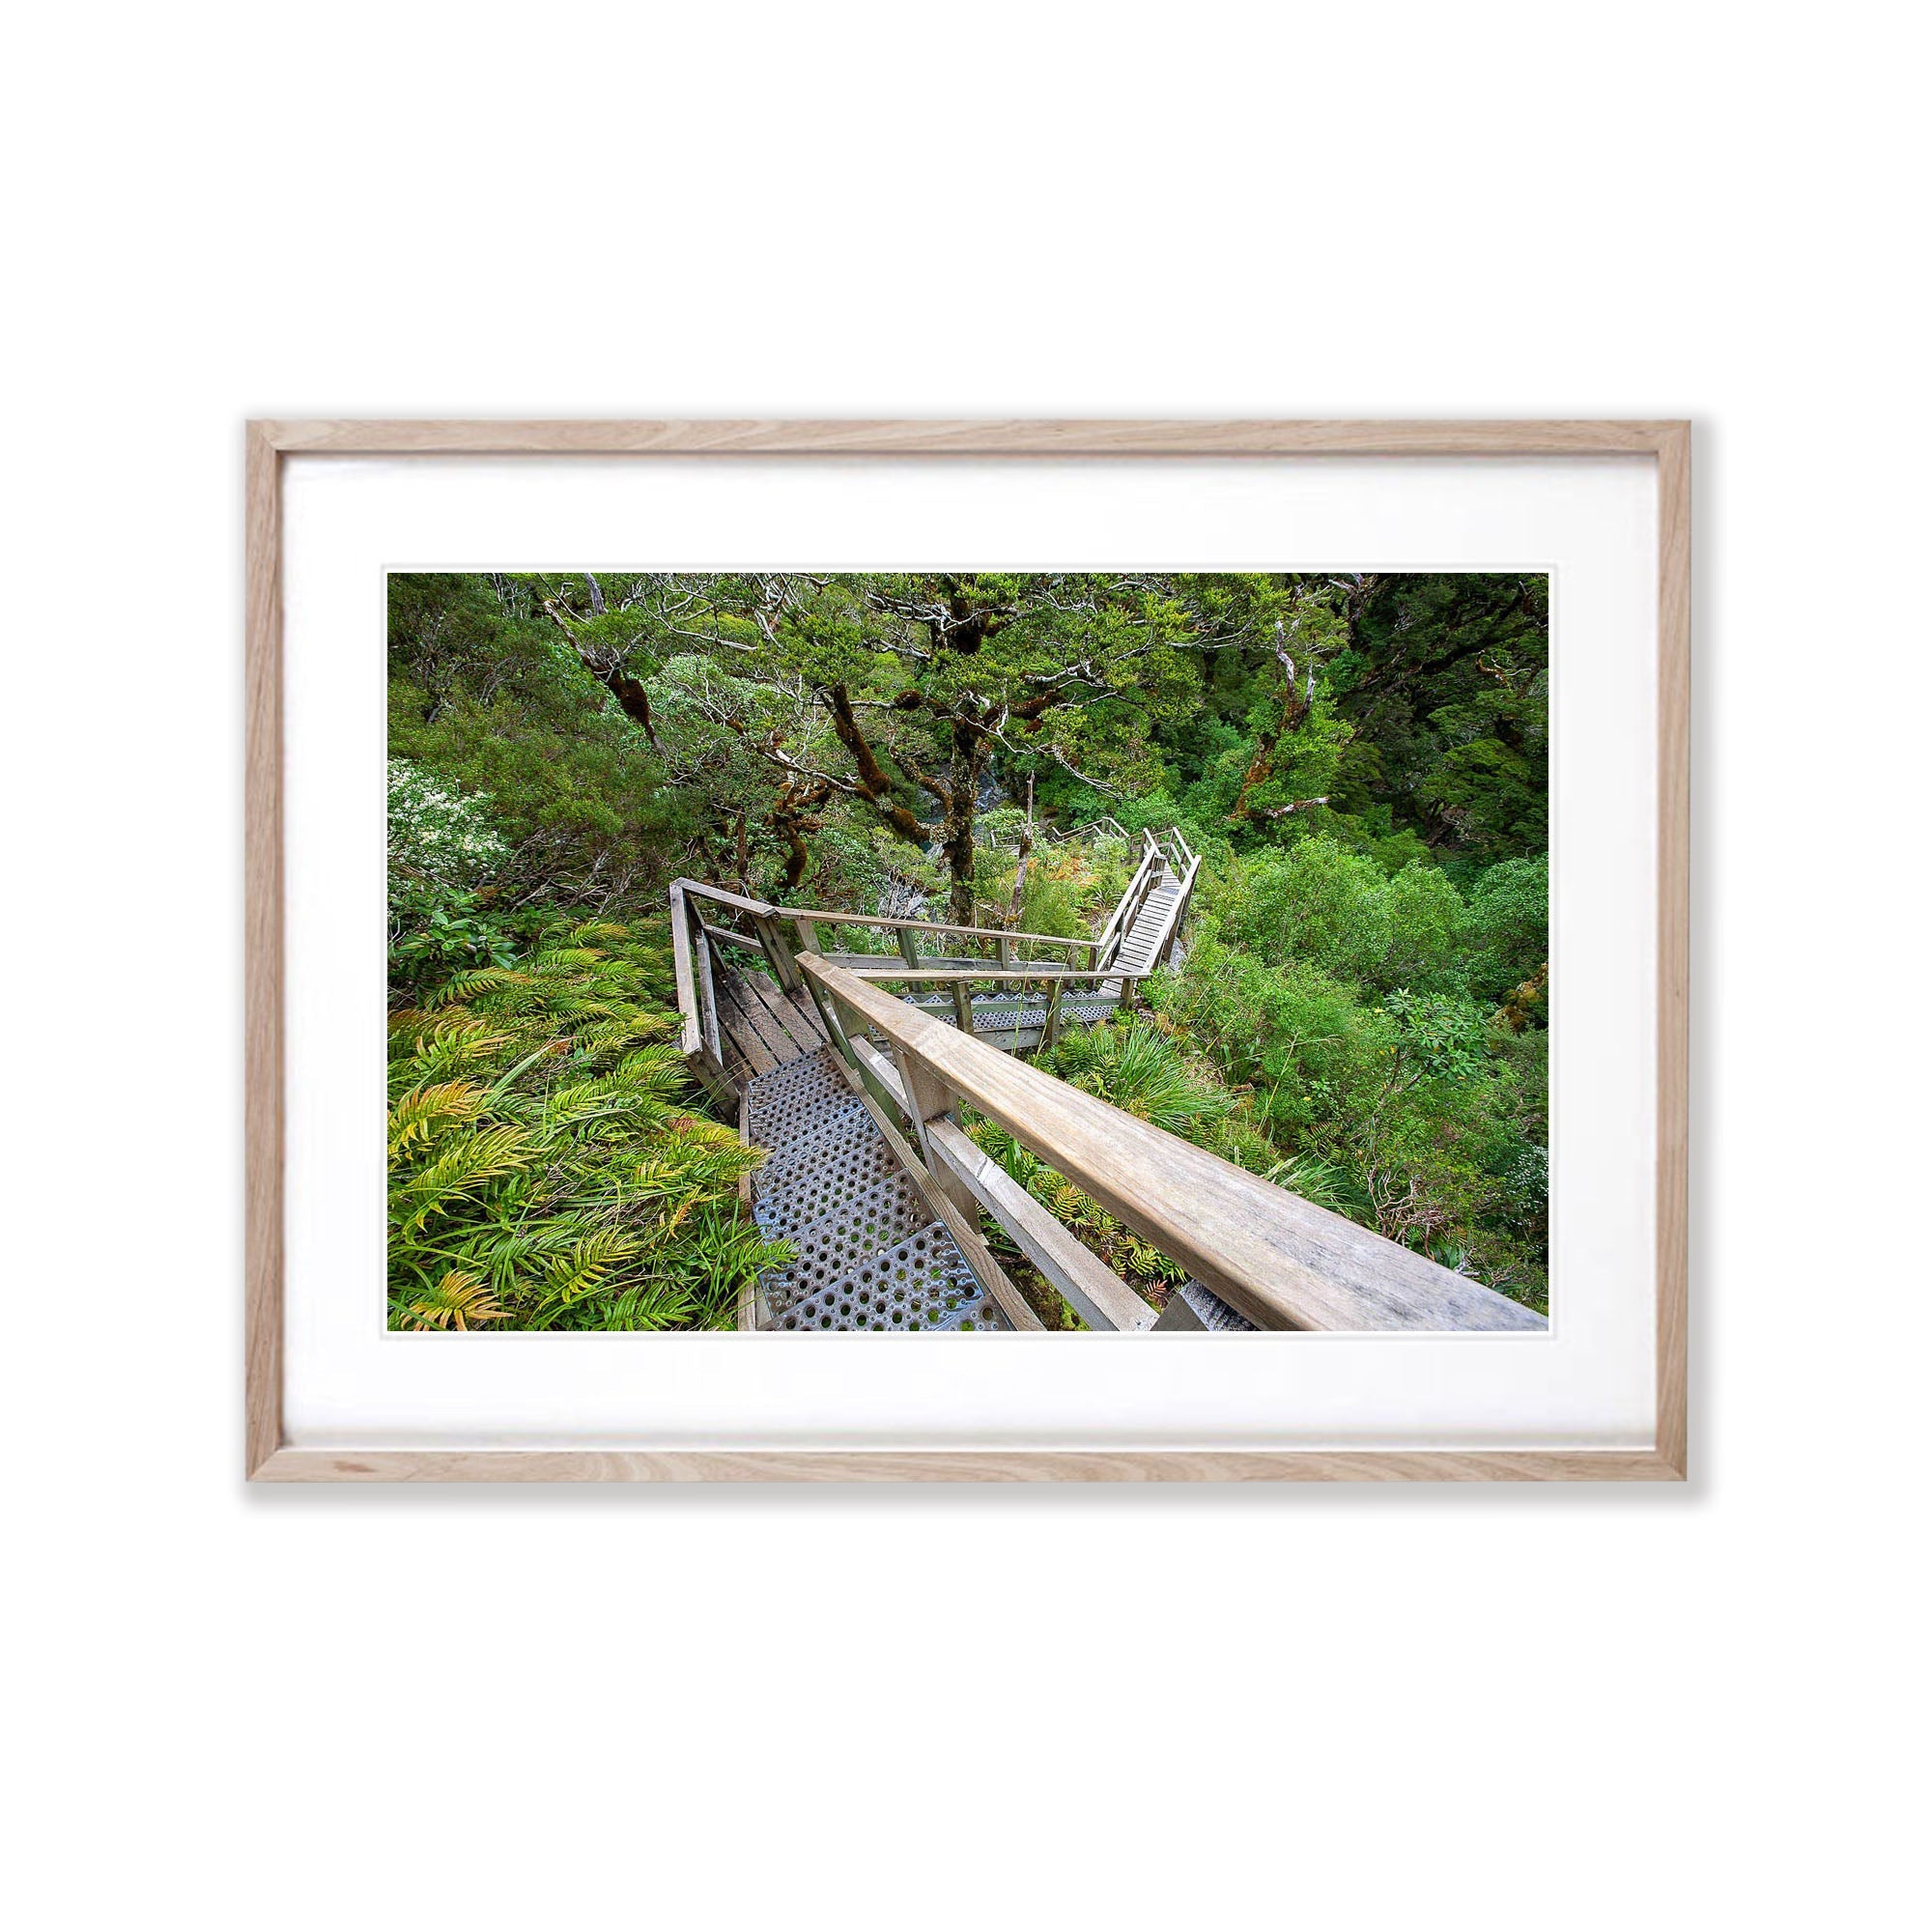 Staircase, Milford Track - New Zealand